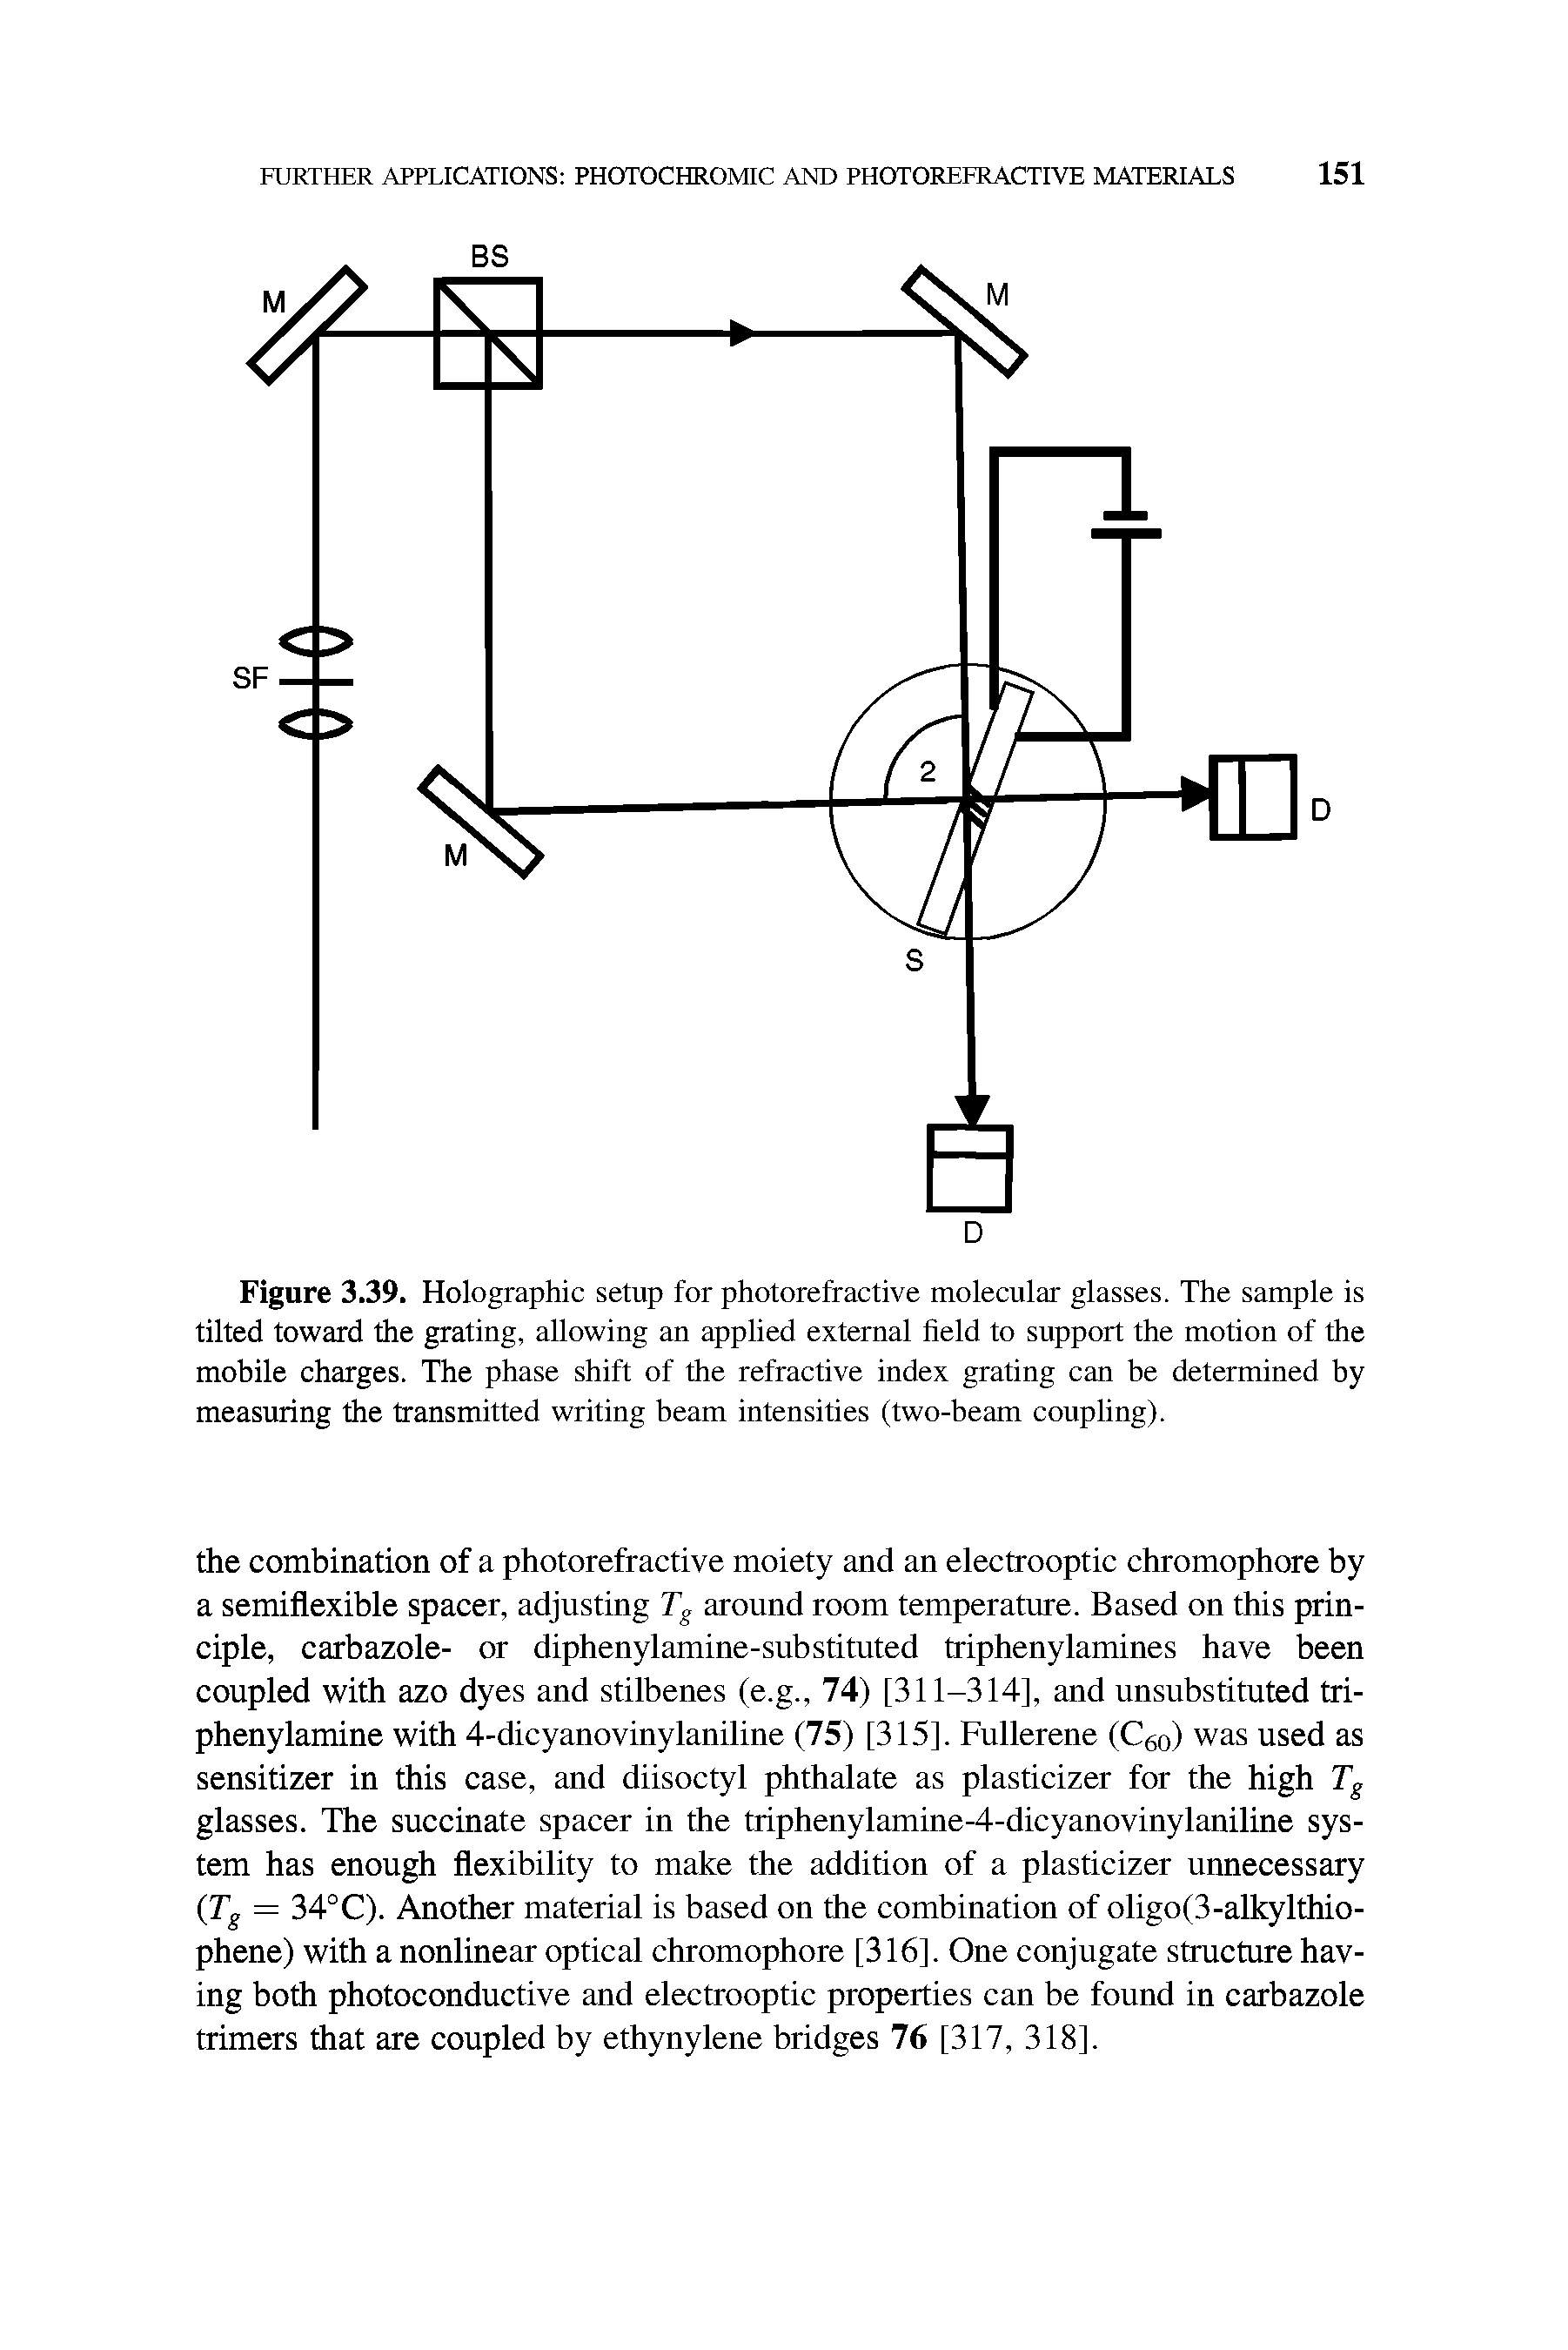 Figure 3.39. Holographic setup for photorefractive molecular glasses. The sample is tilted toward the grating, allowing an applied external Held to support the motion of the mobile charges. The phase shift of the refractive index grating can be determined by measuring the transmitted writing beam intensities (two-beam coupling).